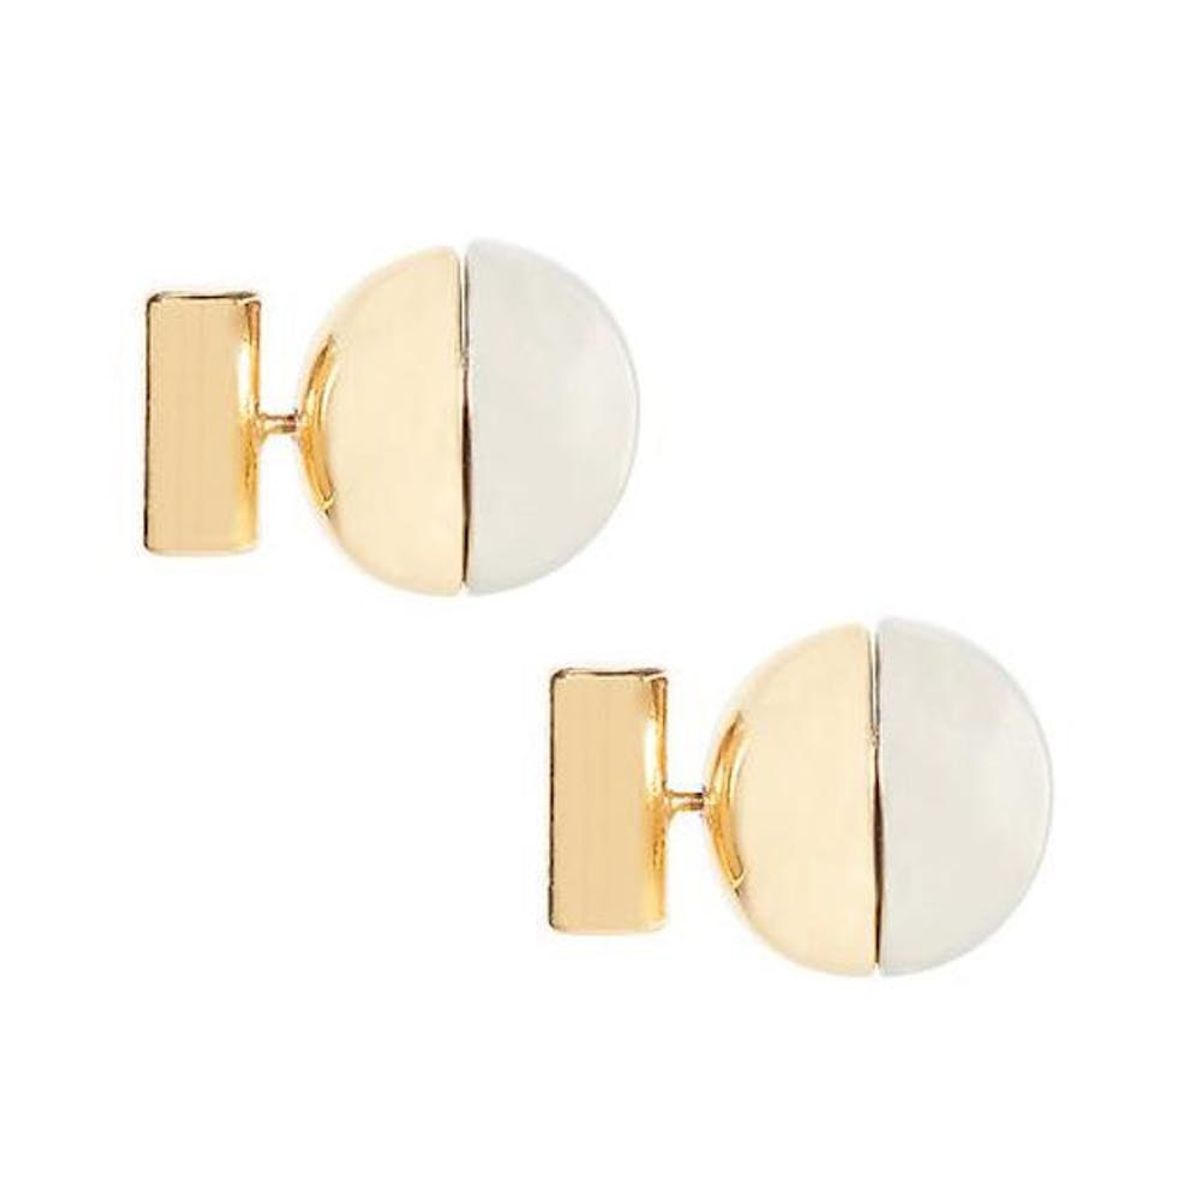 Less = More With These 17 Minimalist Jewelry Pieces